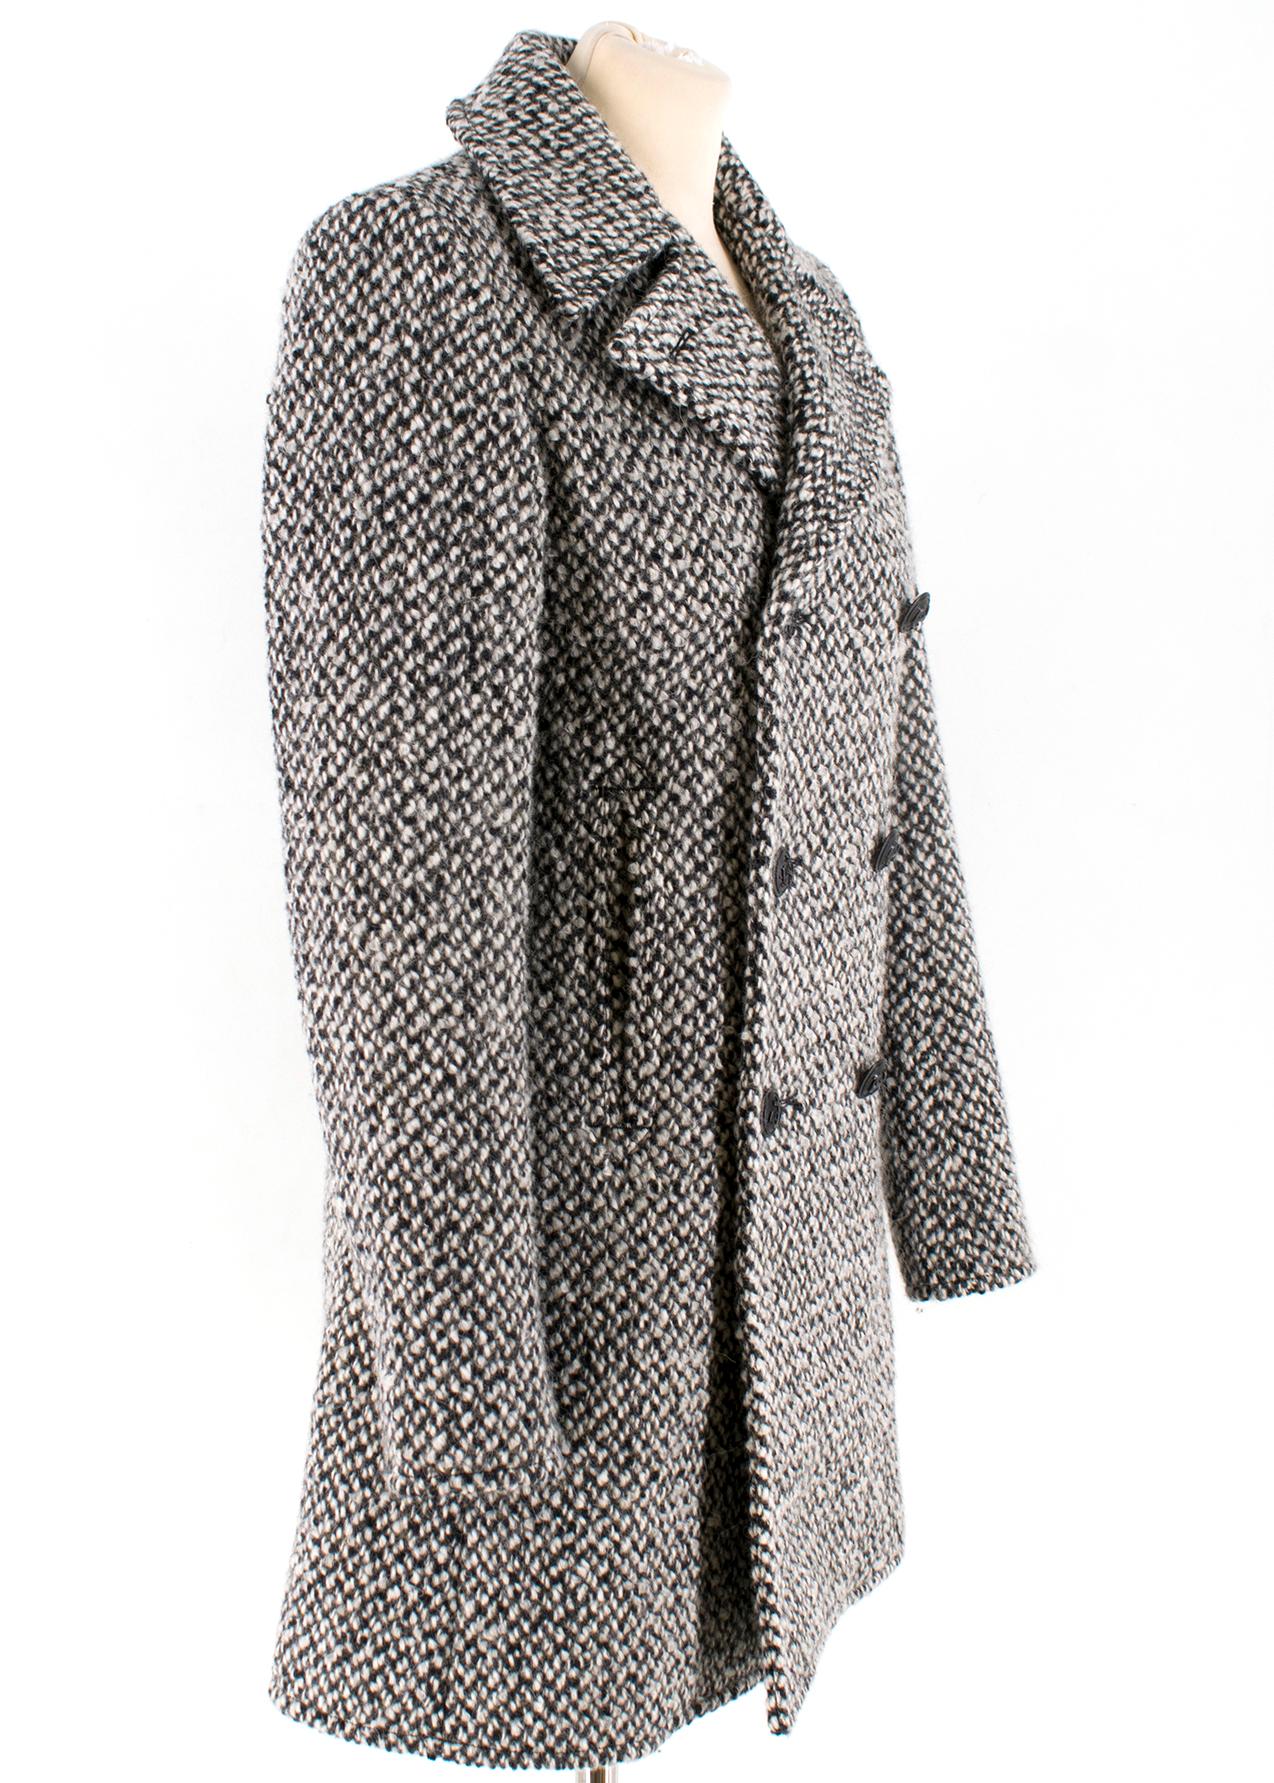 Saint Laurent double breasted tweed coat

- Black and white wool-blend tweed
- Notch lapels, long sleeves
- Off-centre front button fastening
- Silk linings with one pocket
- Made in Italy

Please note, these items are pre-owned and may show some